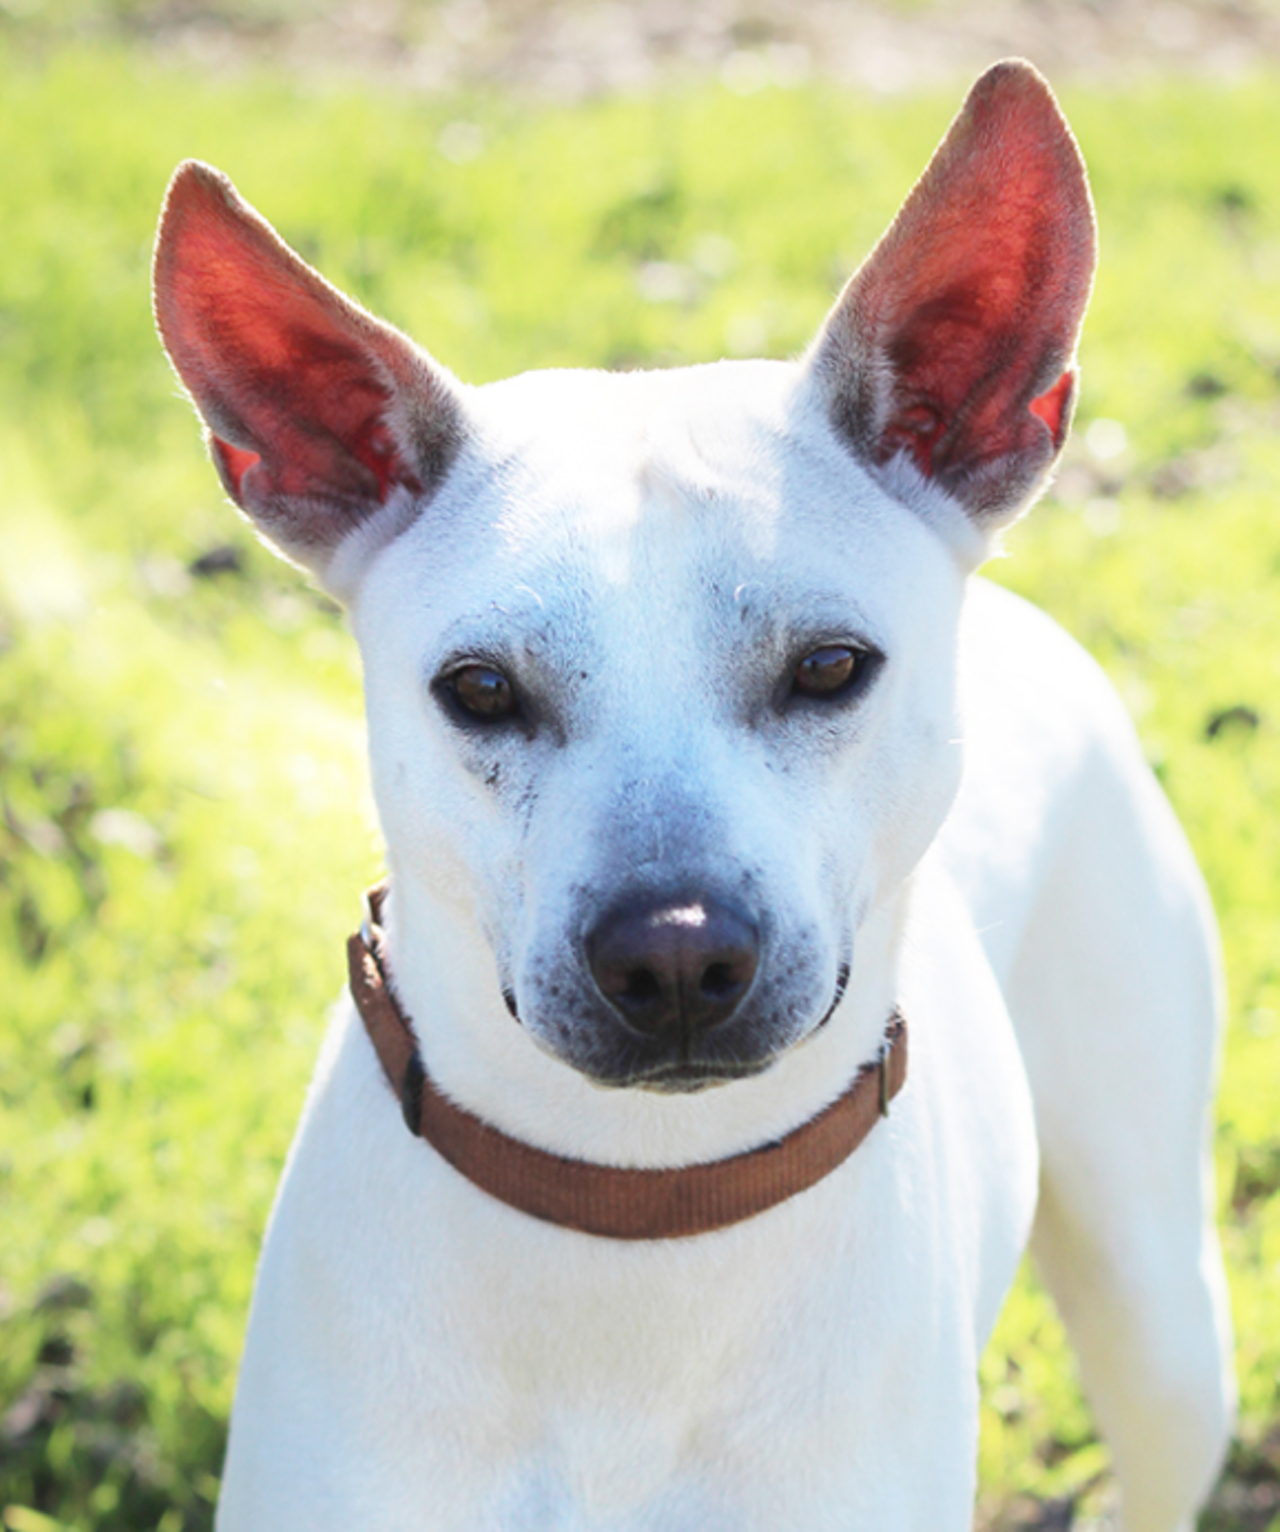 Pharaoh
"Aren’t I such a handsome Pharaoh? I am a playful and fun guy too! I also like to smile a lot because I’m generally a happy boy around people. I also walk well on the leash. Come by and make me the Pharaoh to your home!"